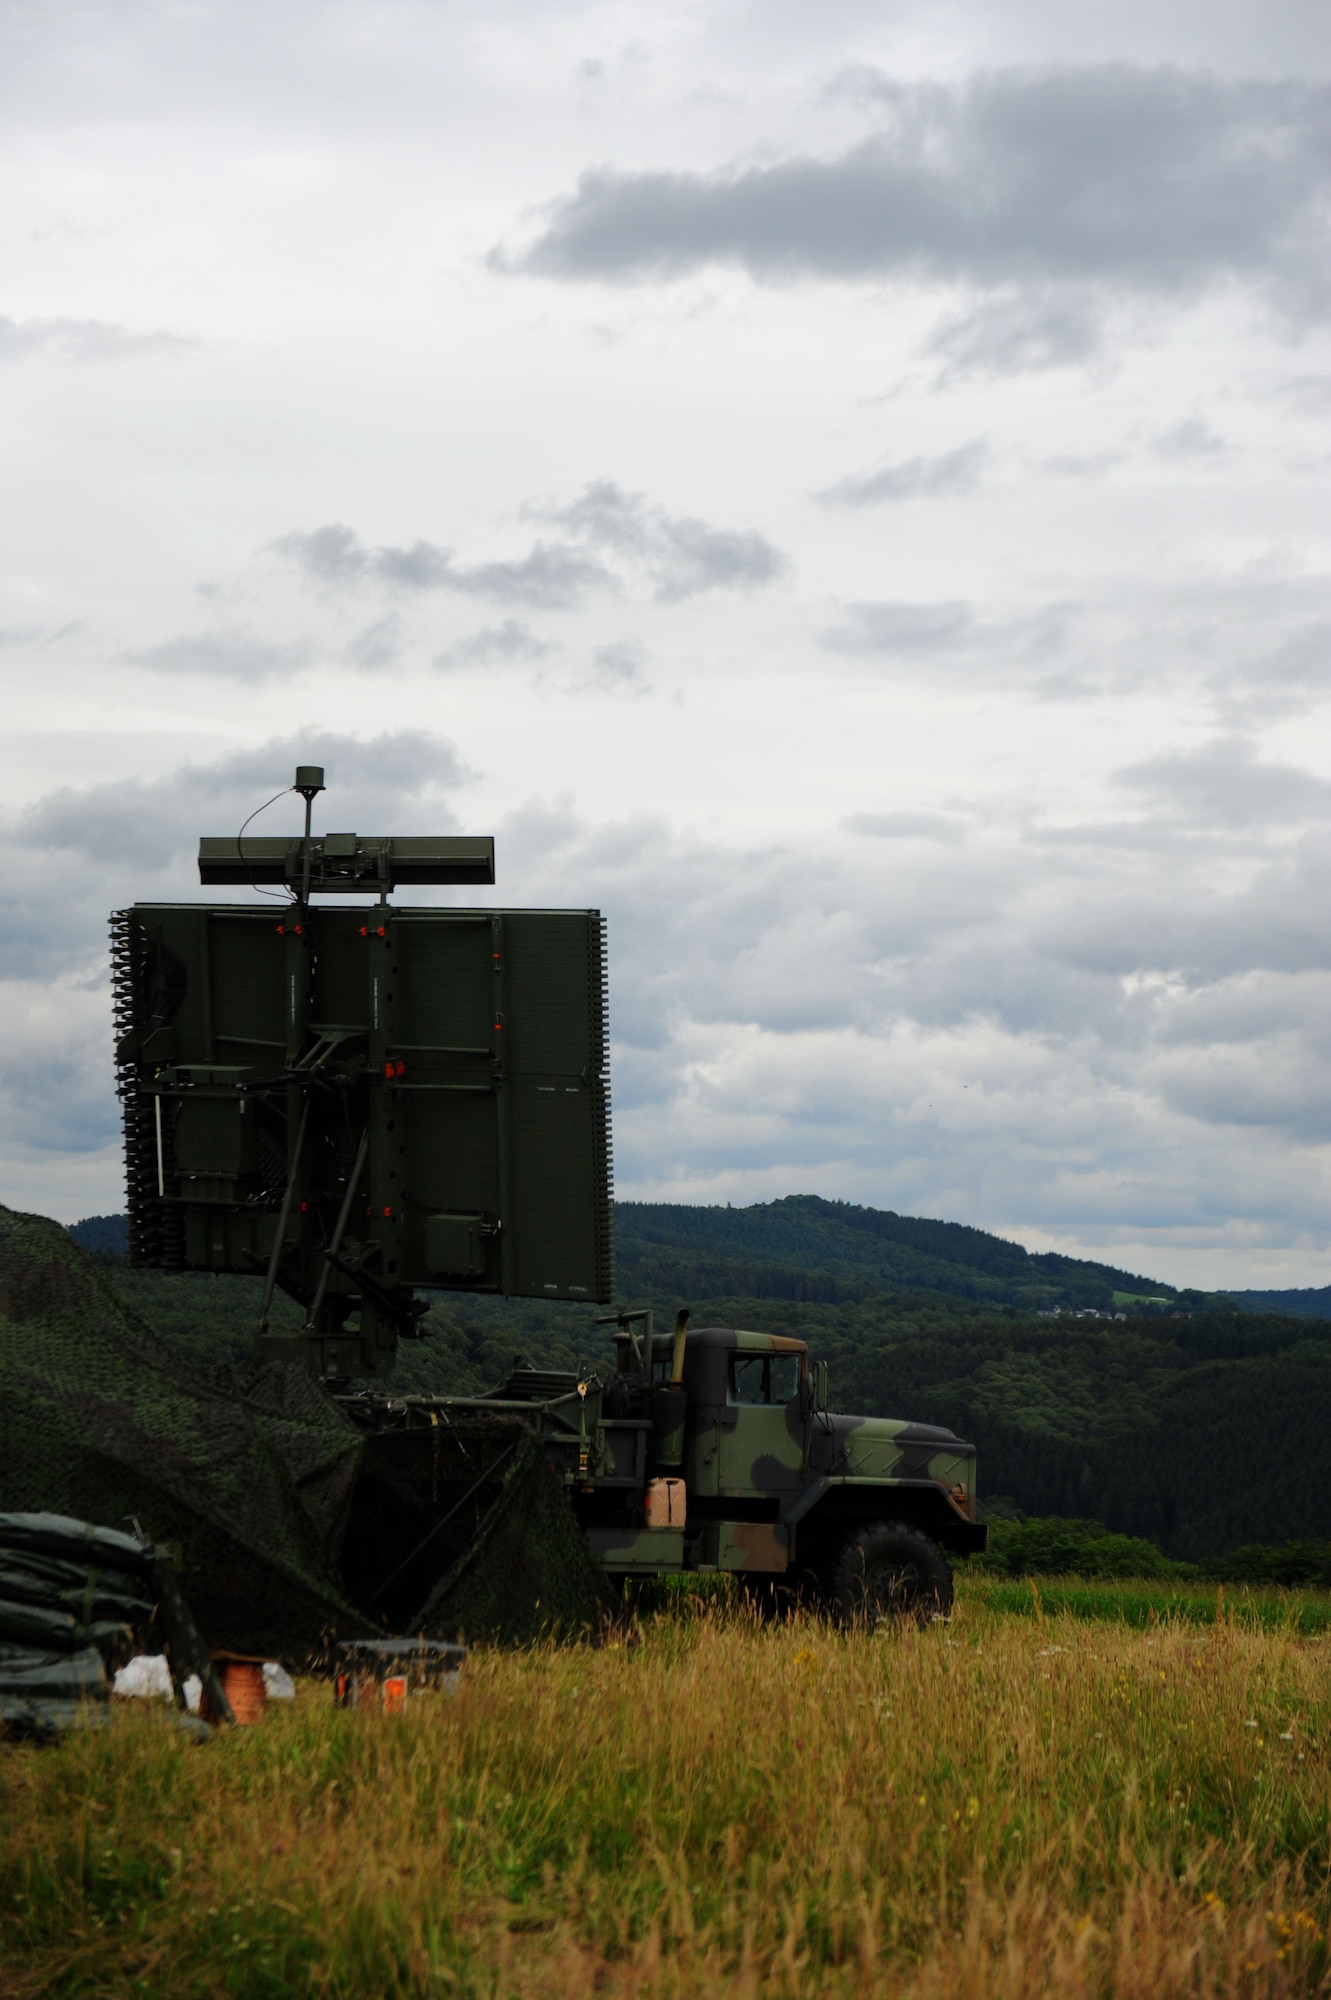 GEROLSTEIN, Germany – An AN/TPS-75 transportable Aerospace Control and Warning radar sits atop a hill for Eifel Strike 2012 here July 16.  Eifel Strike is an annual field training exercise during which Airmen build a controlled radar site as well as a control and reporting center to work and live out of for a week. Exercises like this are designed to give Spangdahlem Airmen the practice, skills and experience they need to deploy efficiently and effectively within a moment’s notice in support of contingency operations around the world. (U.S. Air Force photo by Airman 1st Class Gustavo Castillo/Released)